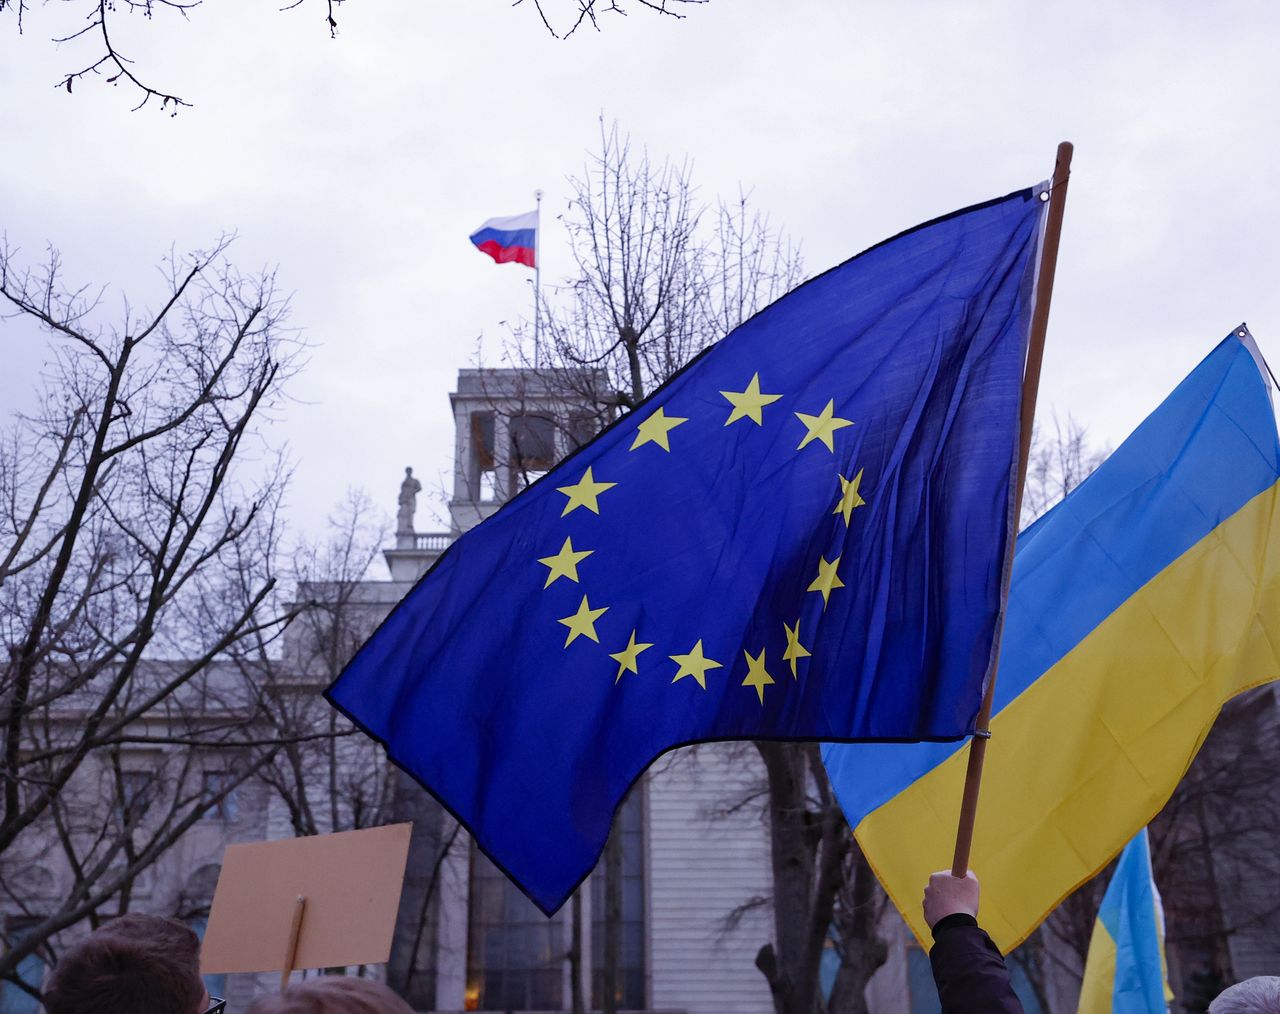 Conservative call for unemployed Ukrainians to leave Germany sparks backlash